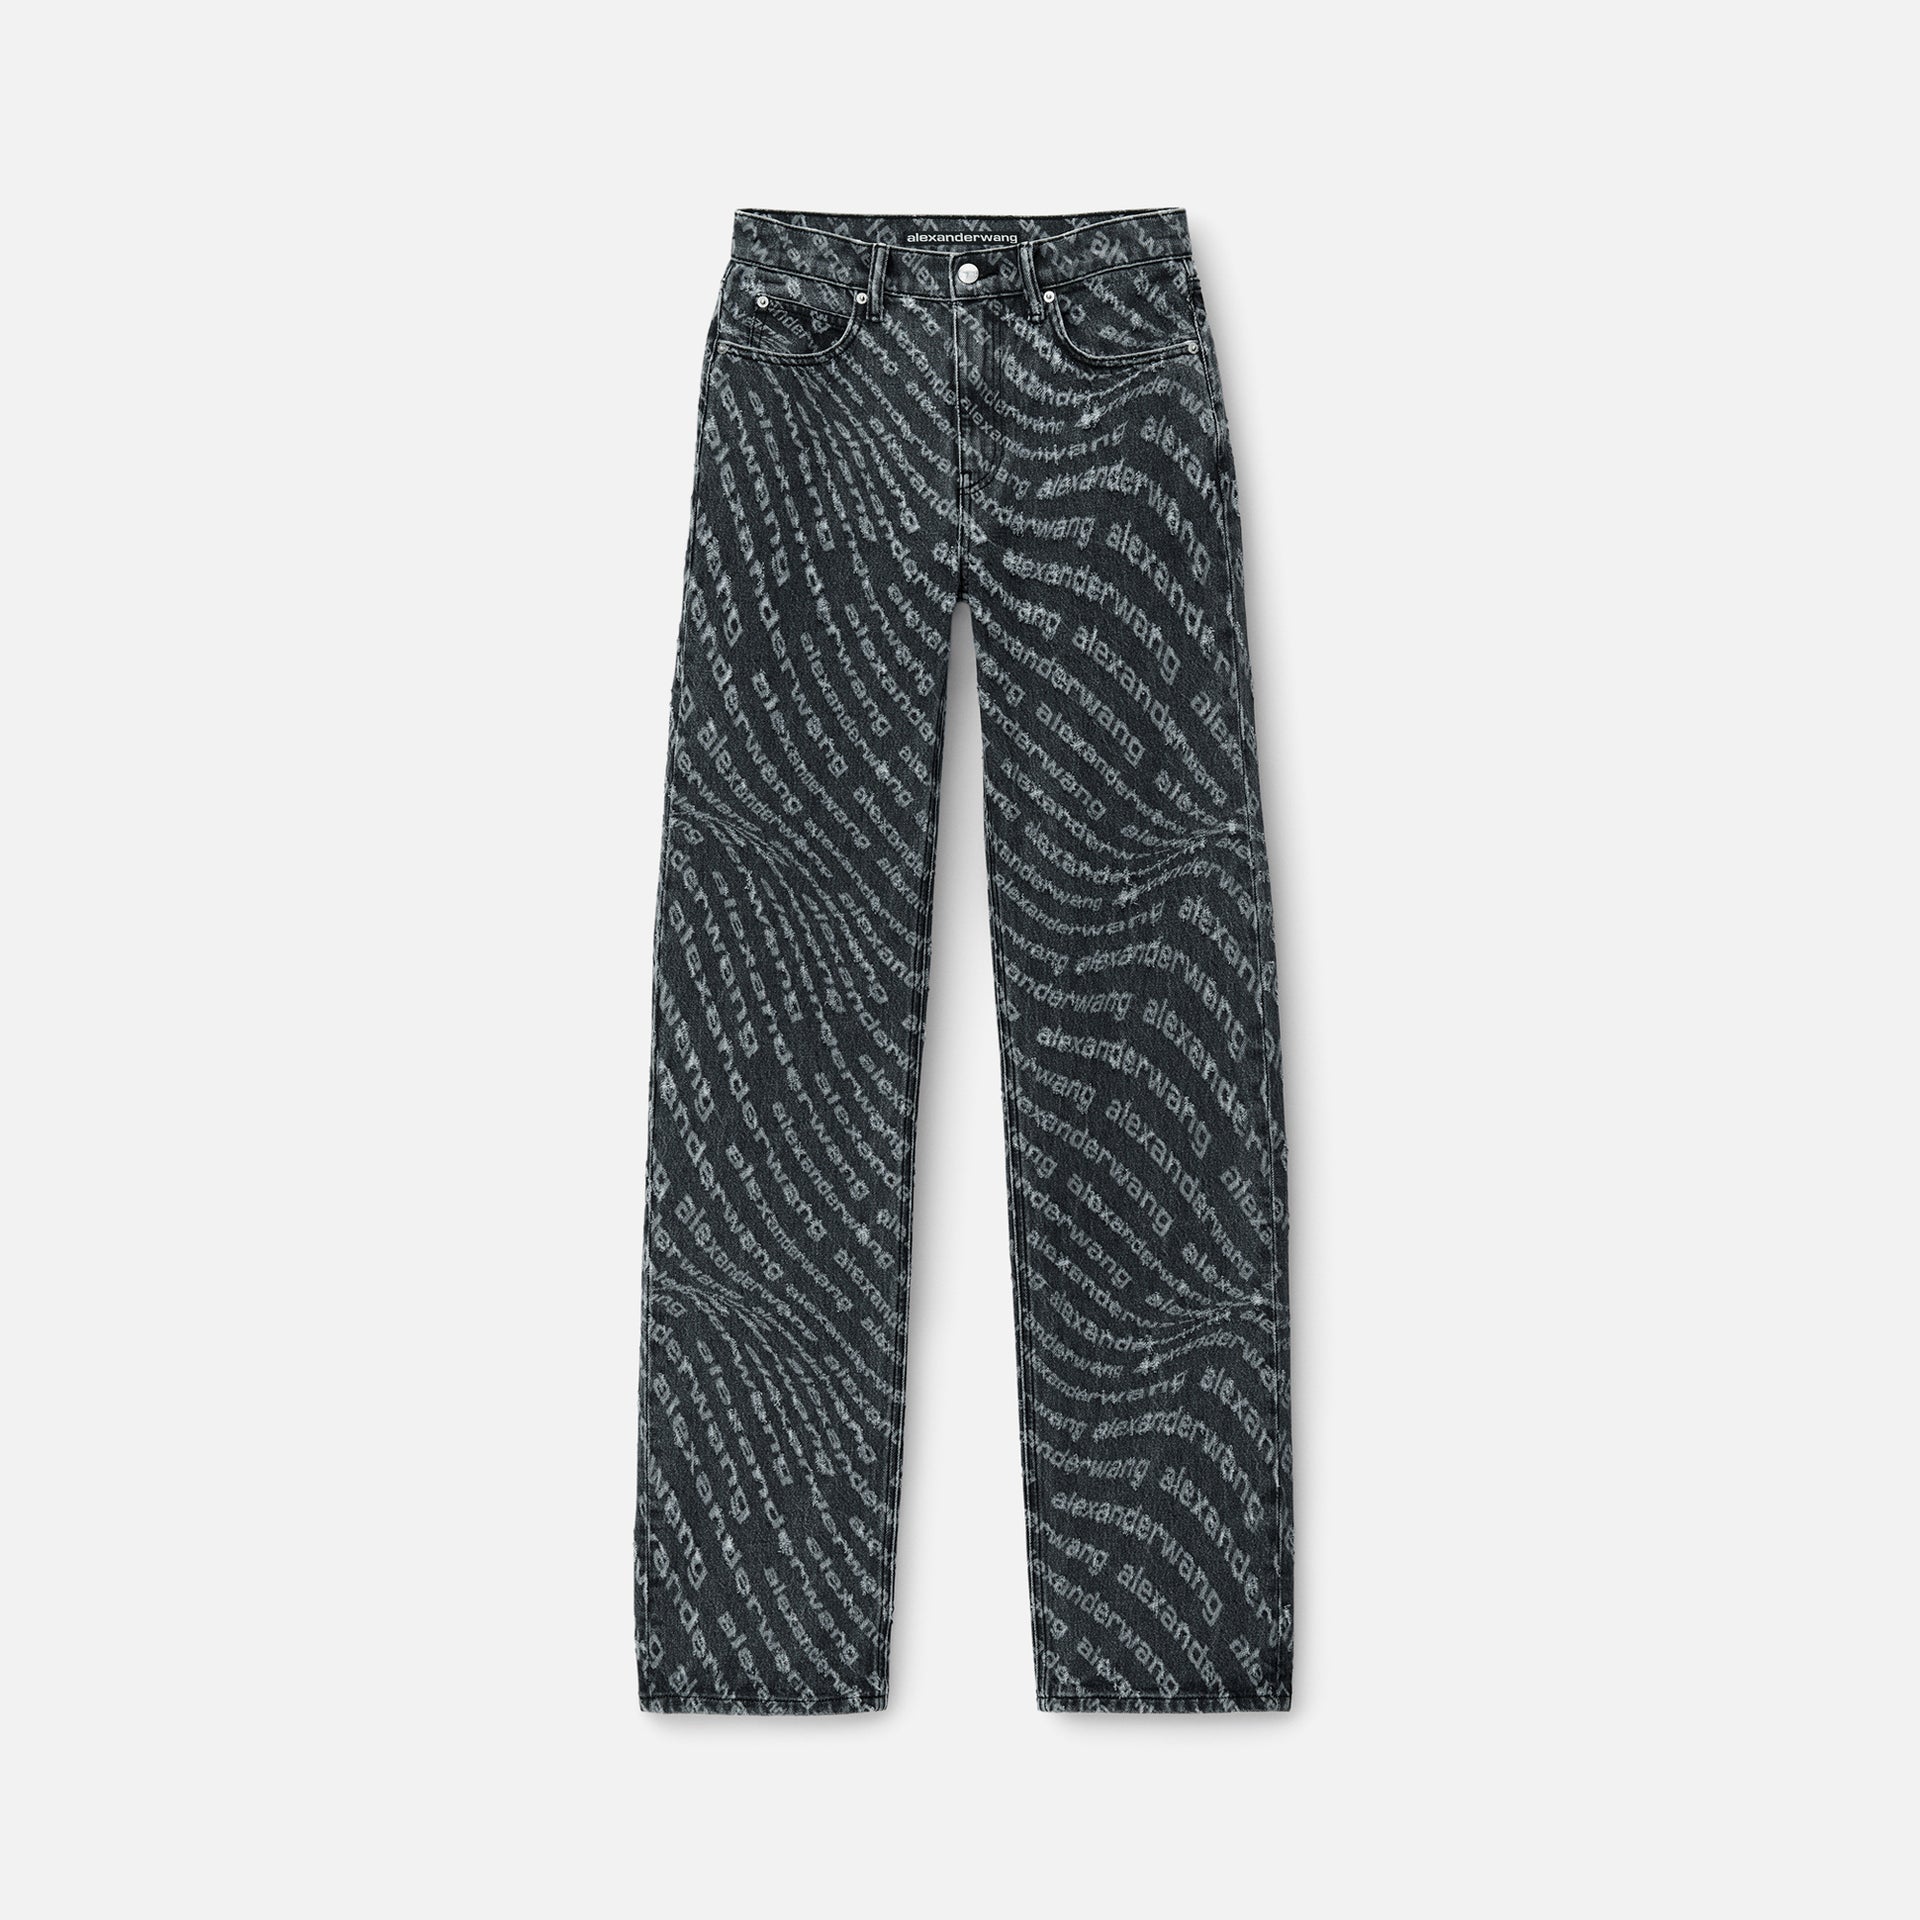 T by Alexander Wang EZ Mid Rise Relaxed Straight front Jean - Shredded Wave